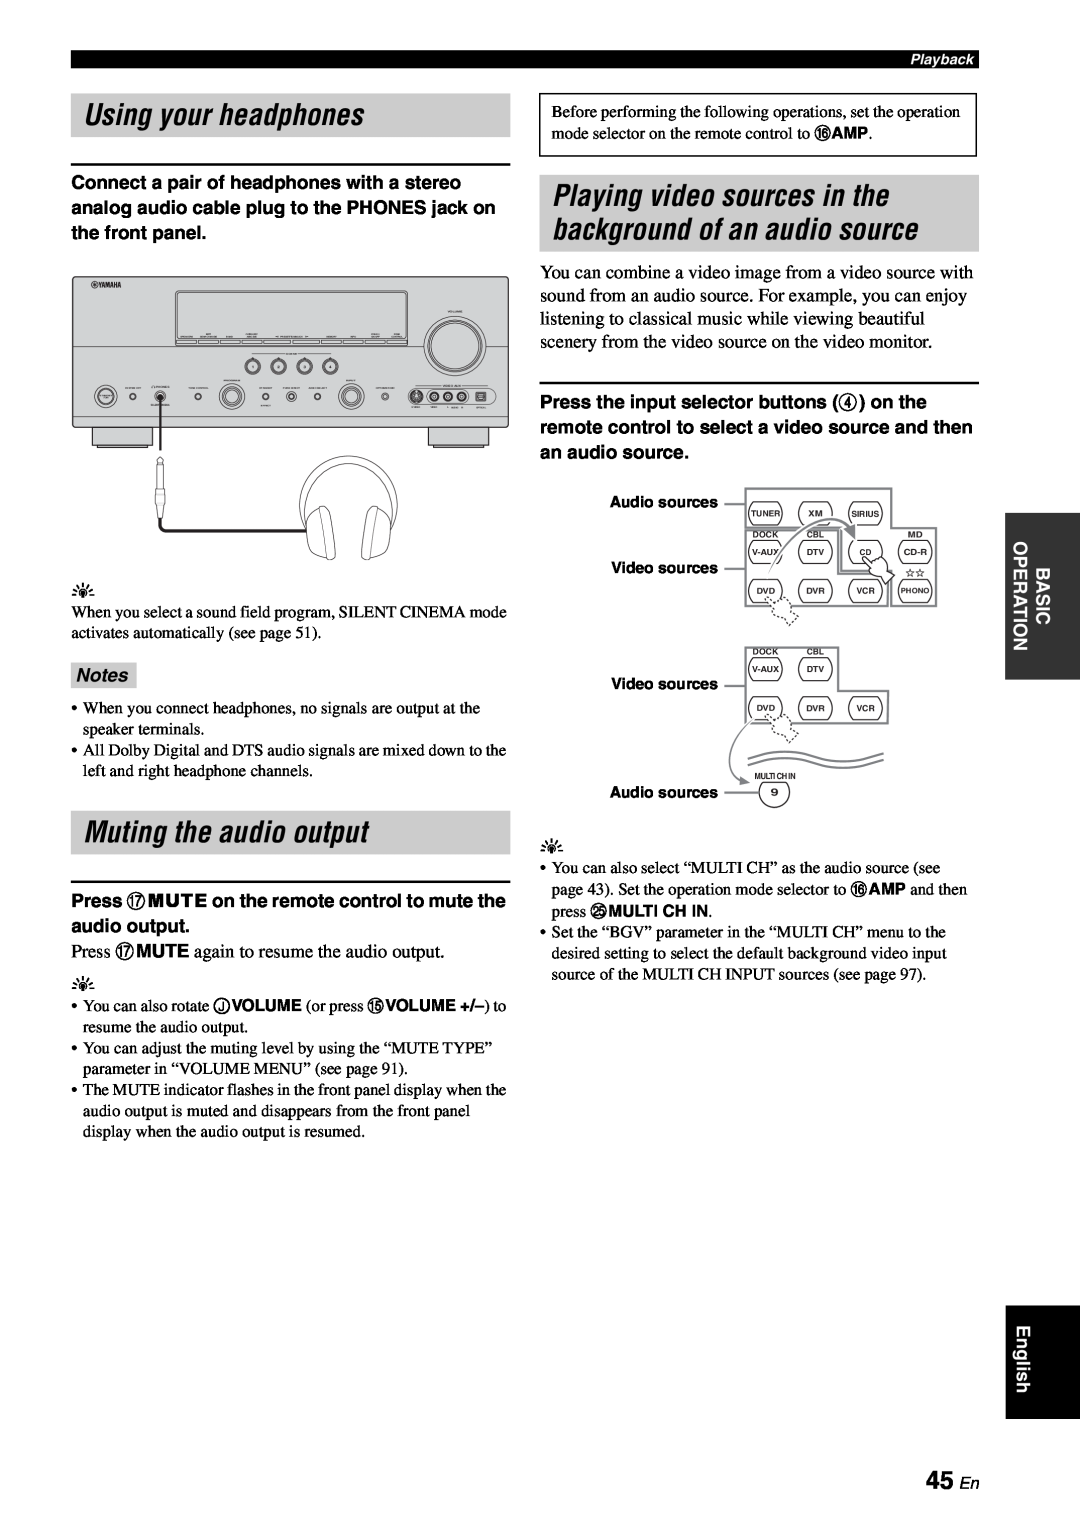 Yamaha RX-V863 owner manual Using your headphones, Muting the audio output, 45 En, Notes 